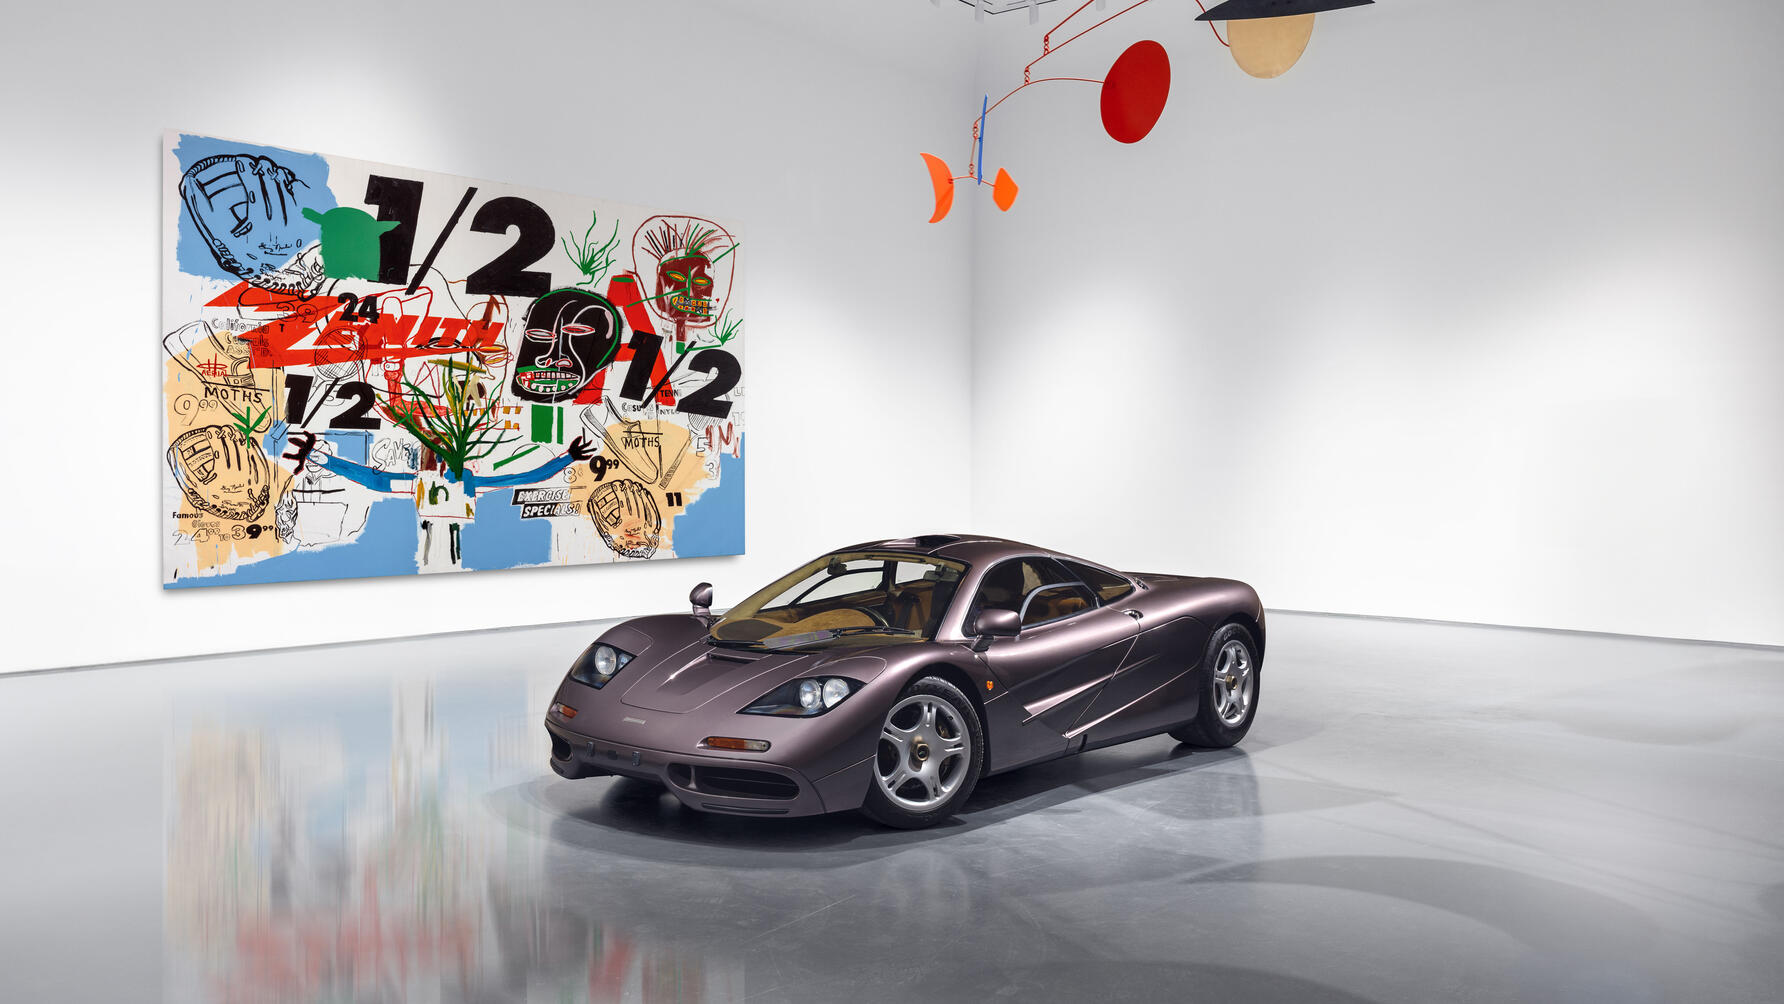 this 254-mile mclaren f1 is coming up for auction (again), yours for $20m+